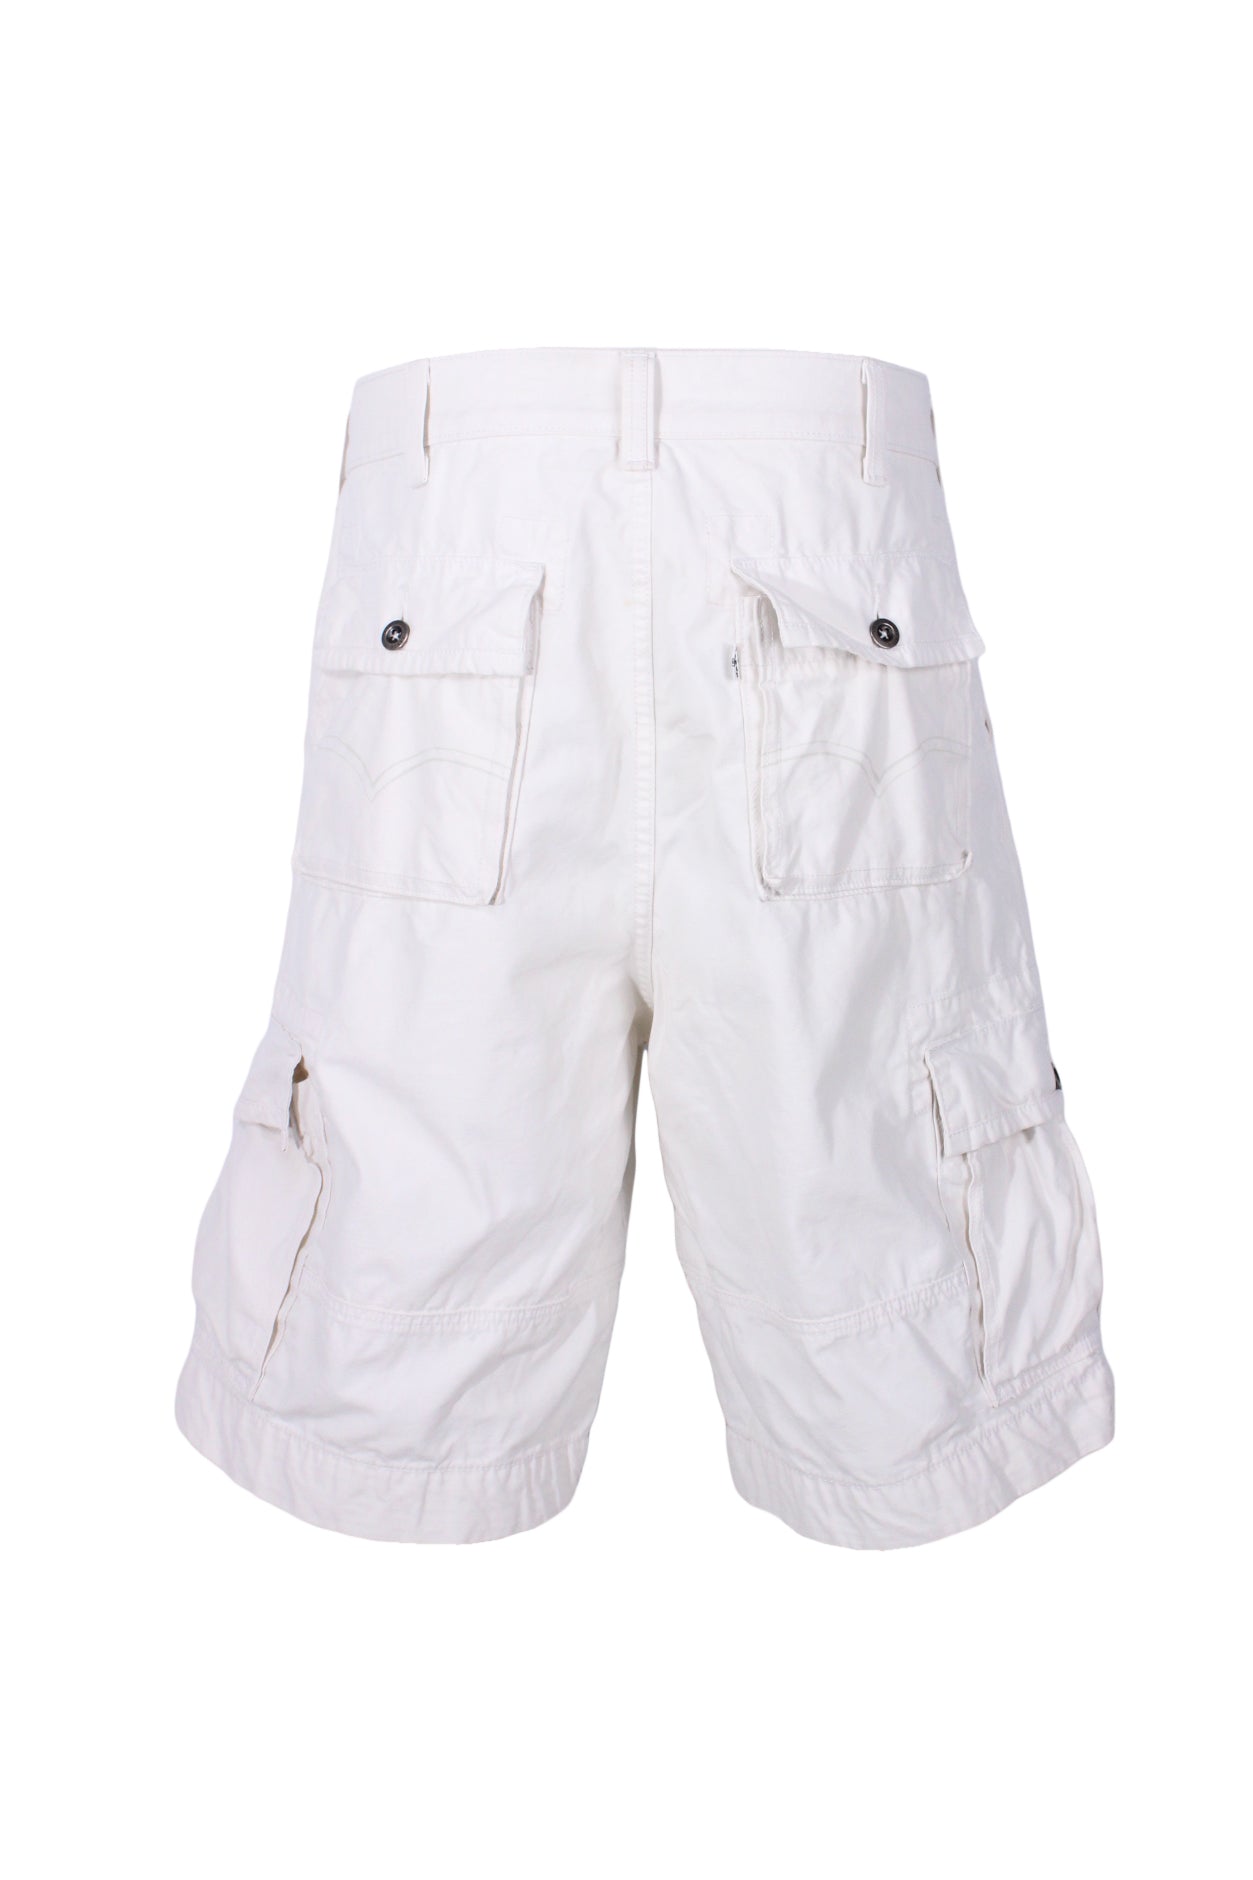 back angle levi's off-white cotton cargo shorts featuring rear flap pockets and side utility pockets.